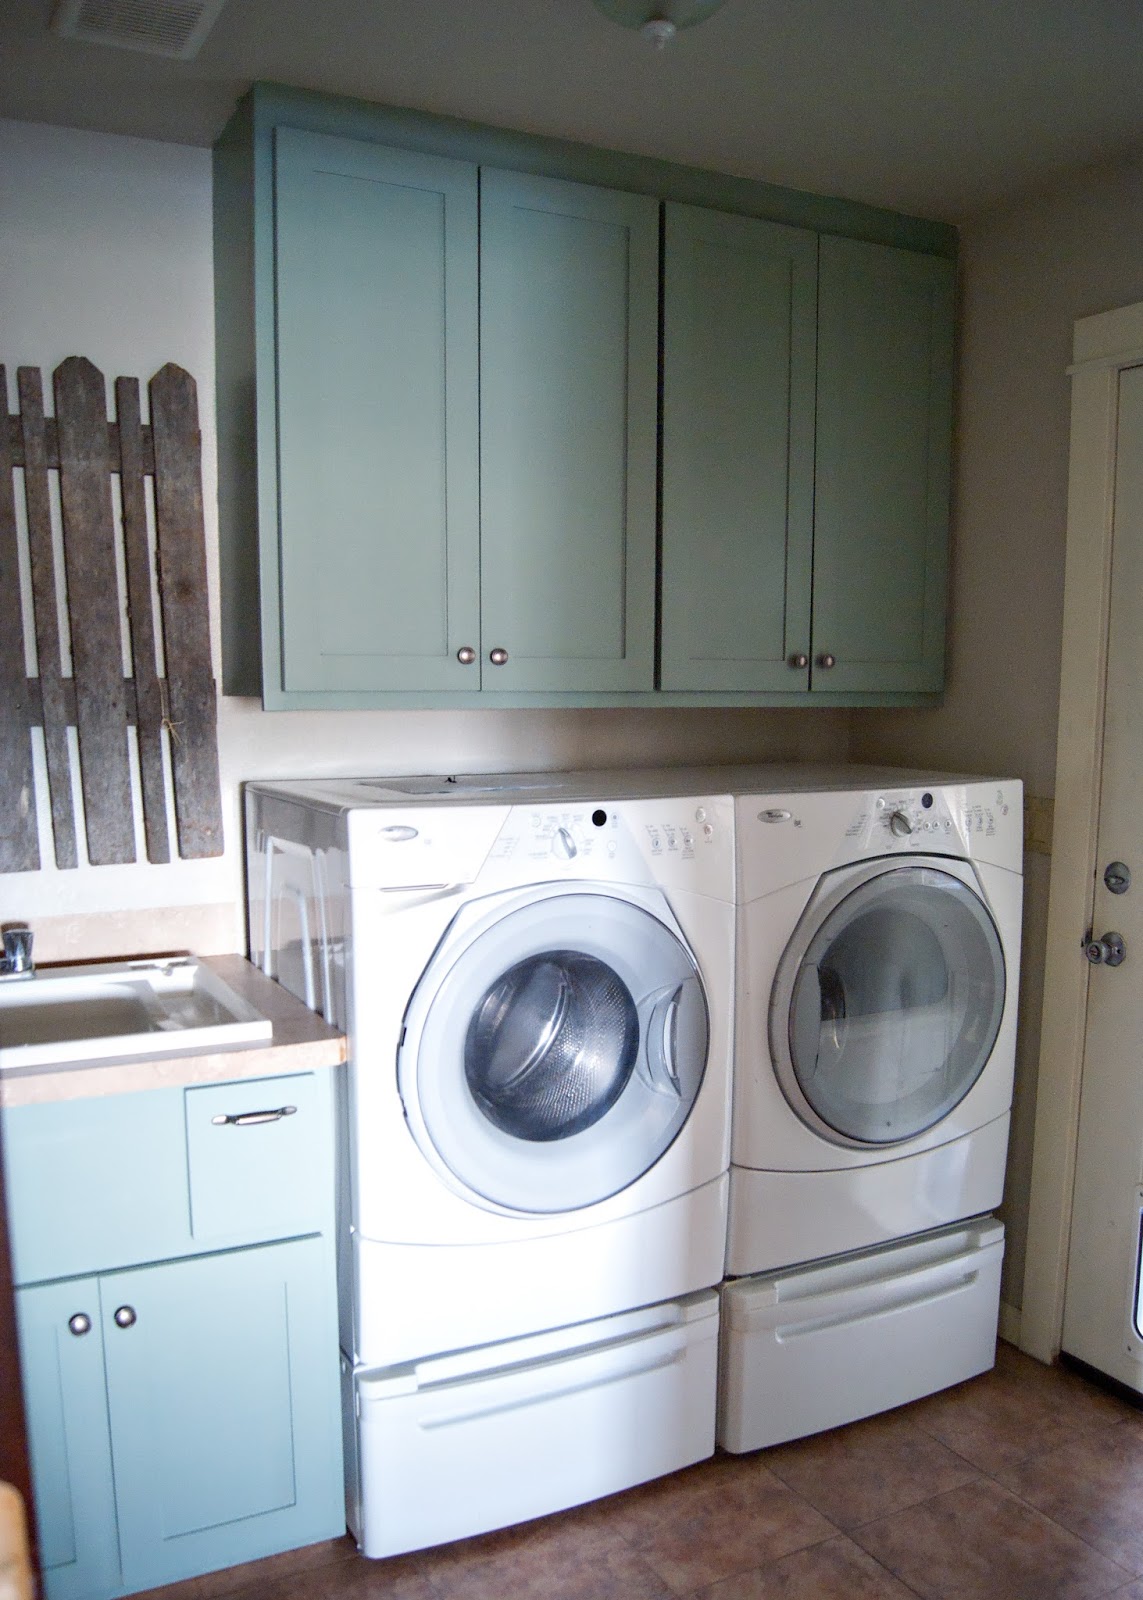 Laundry Room Makeover - After